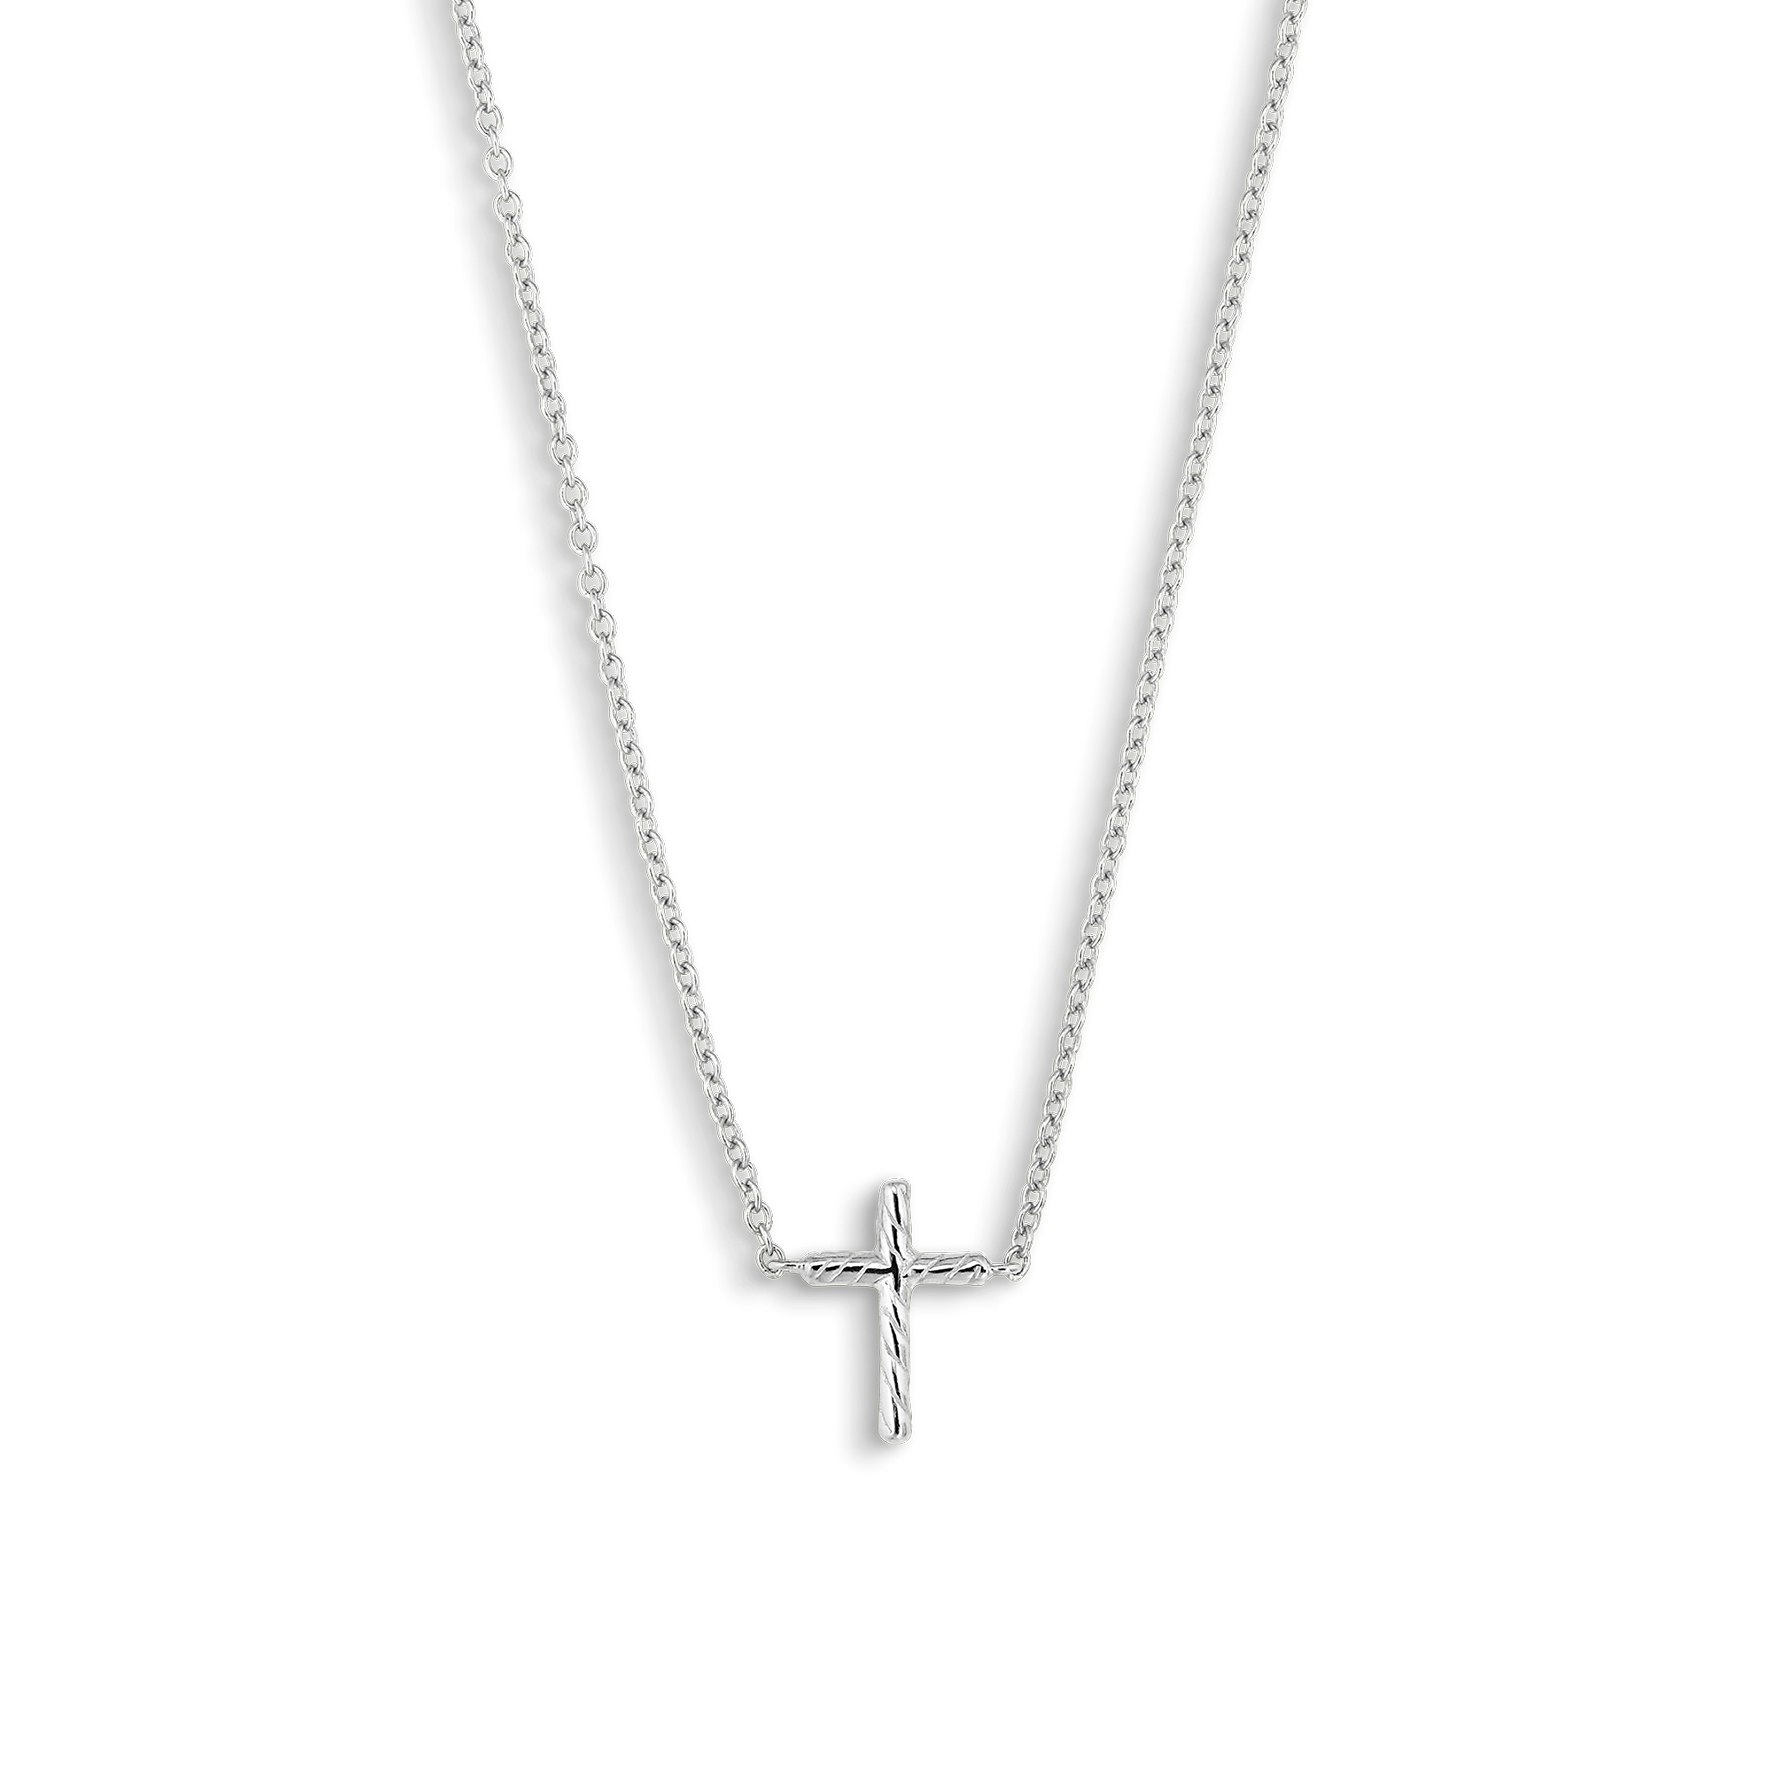 Cross Necklace from Jane Kønig in Silver Sterling 925